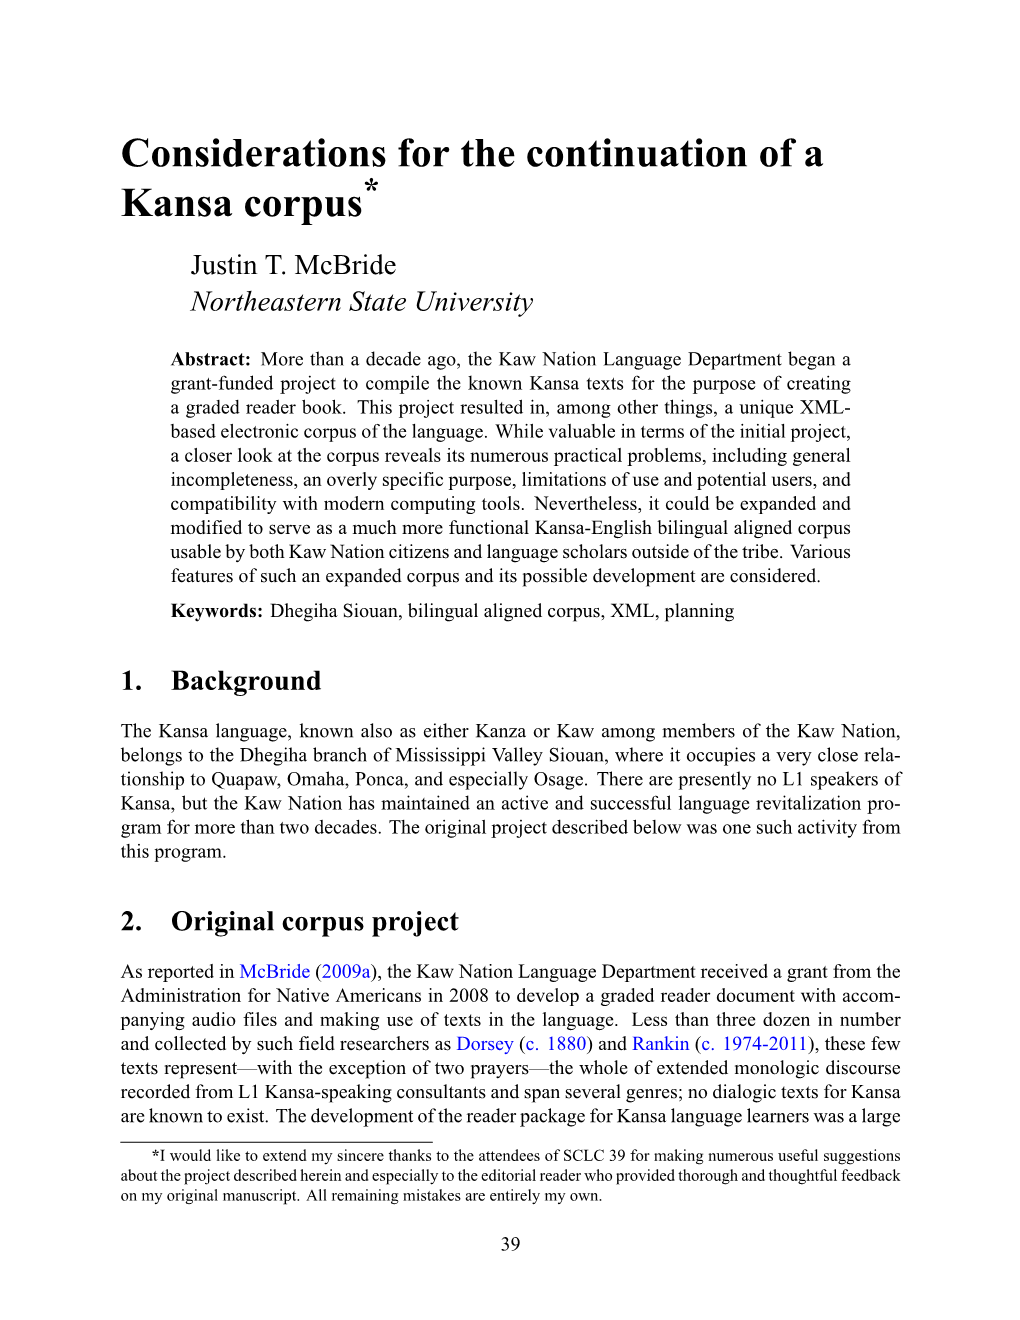 Considerations for the Continuation of a Kansa Corpus* Justin T